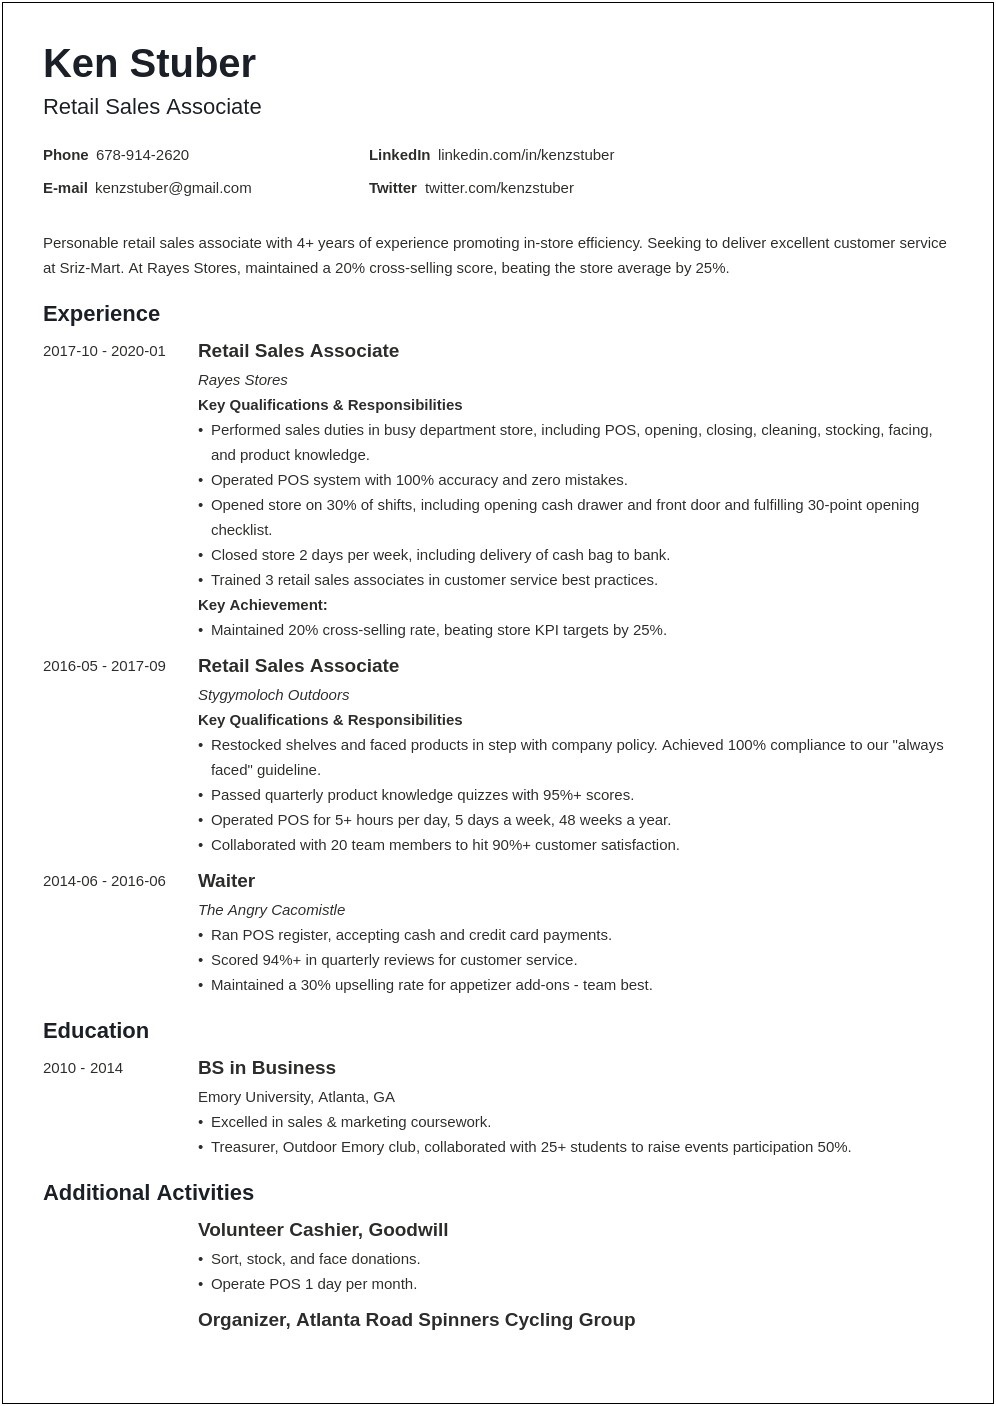 Resume Objective Statement For Entry Level Sales Associate